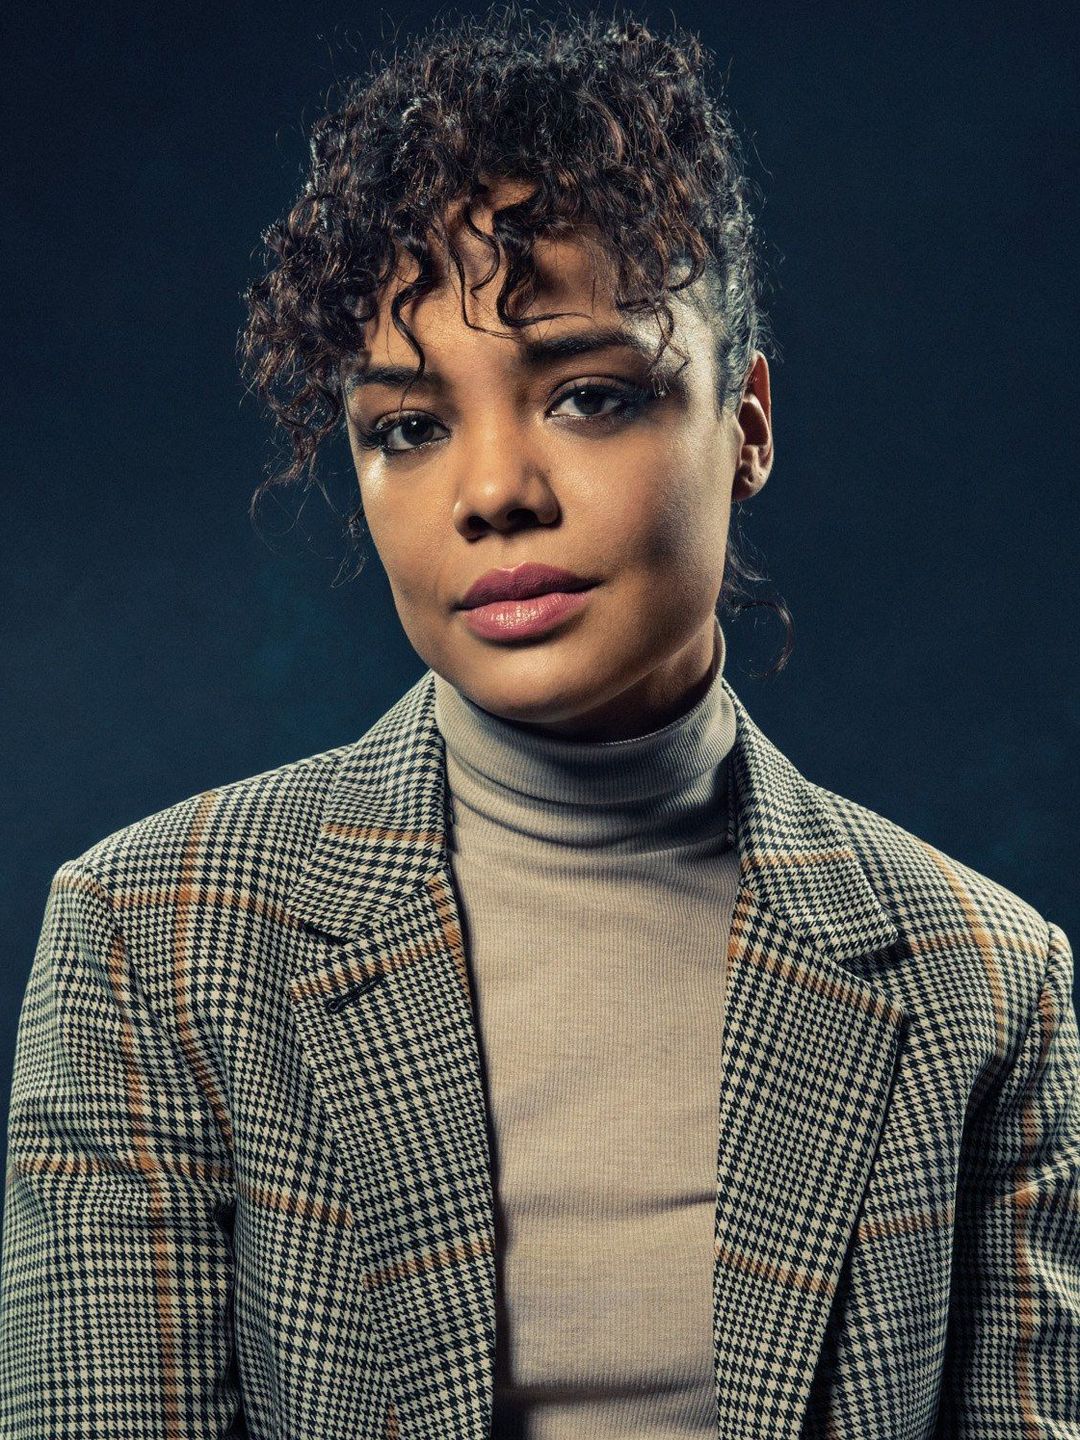 Tessa Thompson who is her father